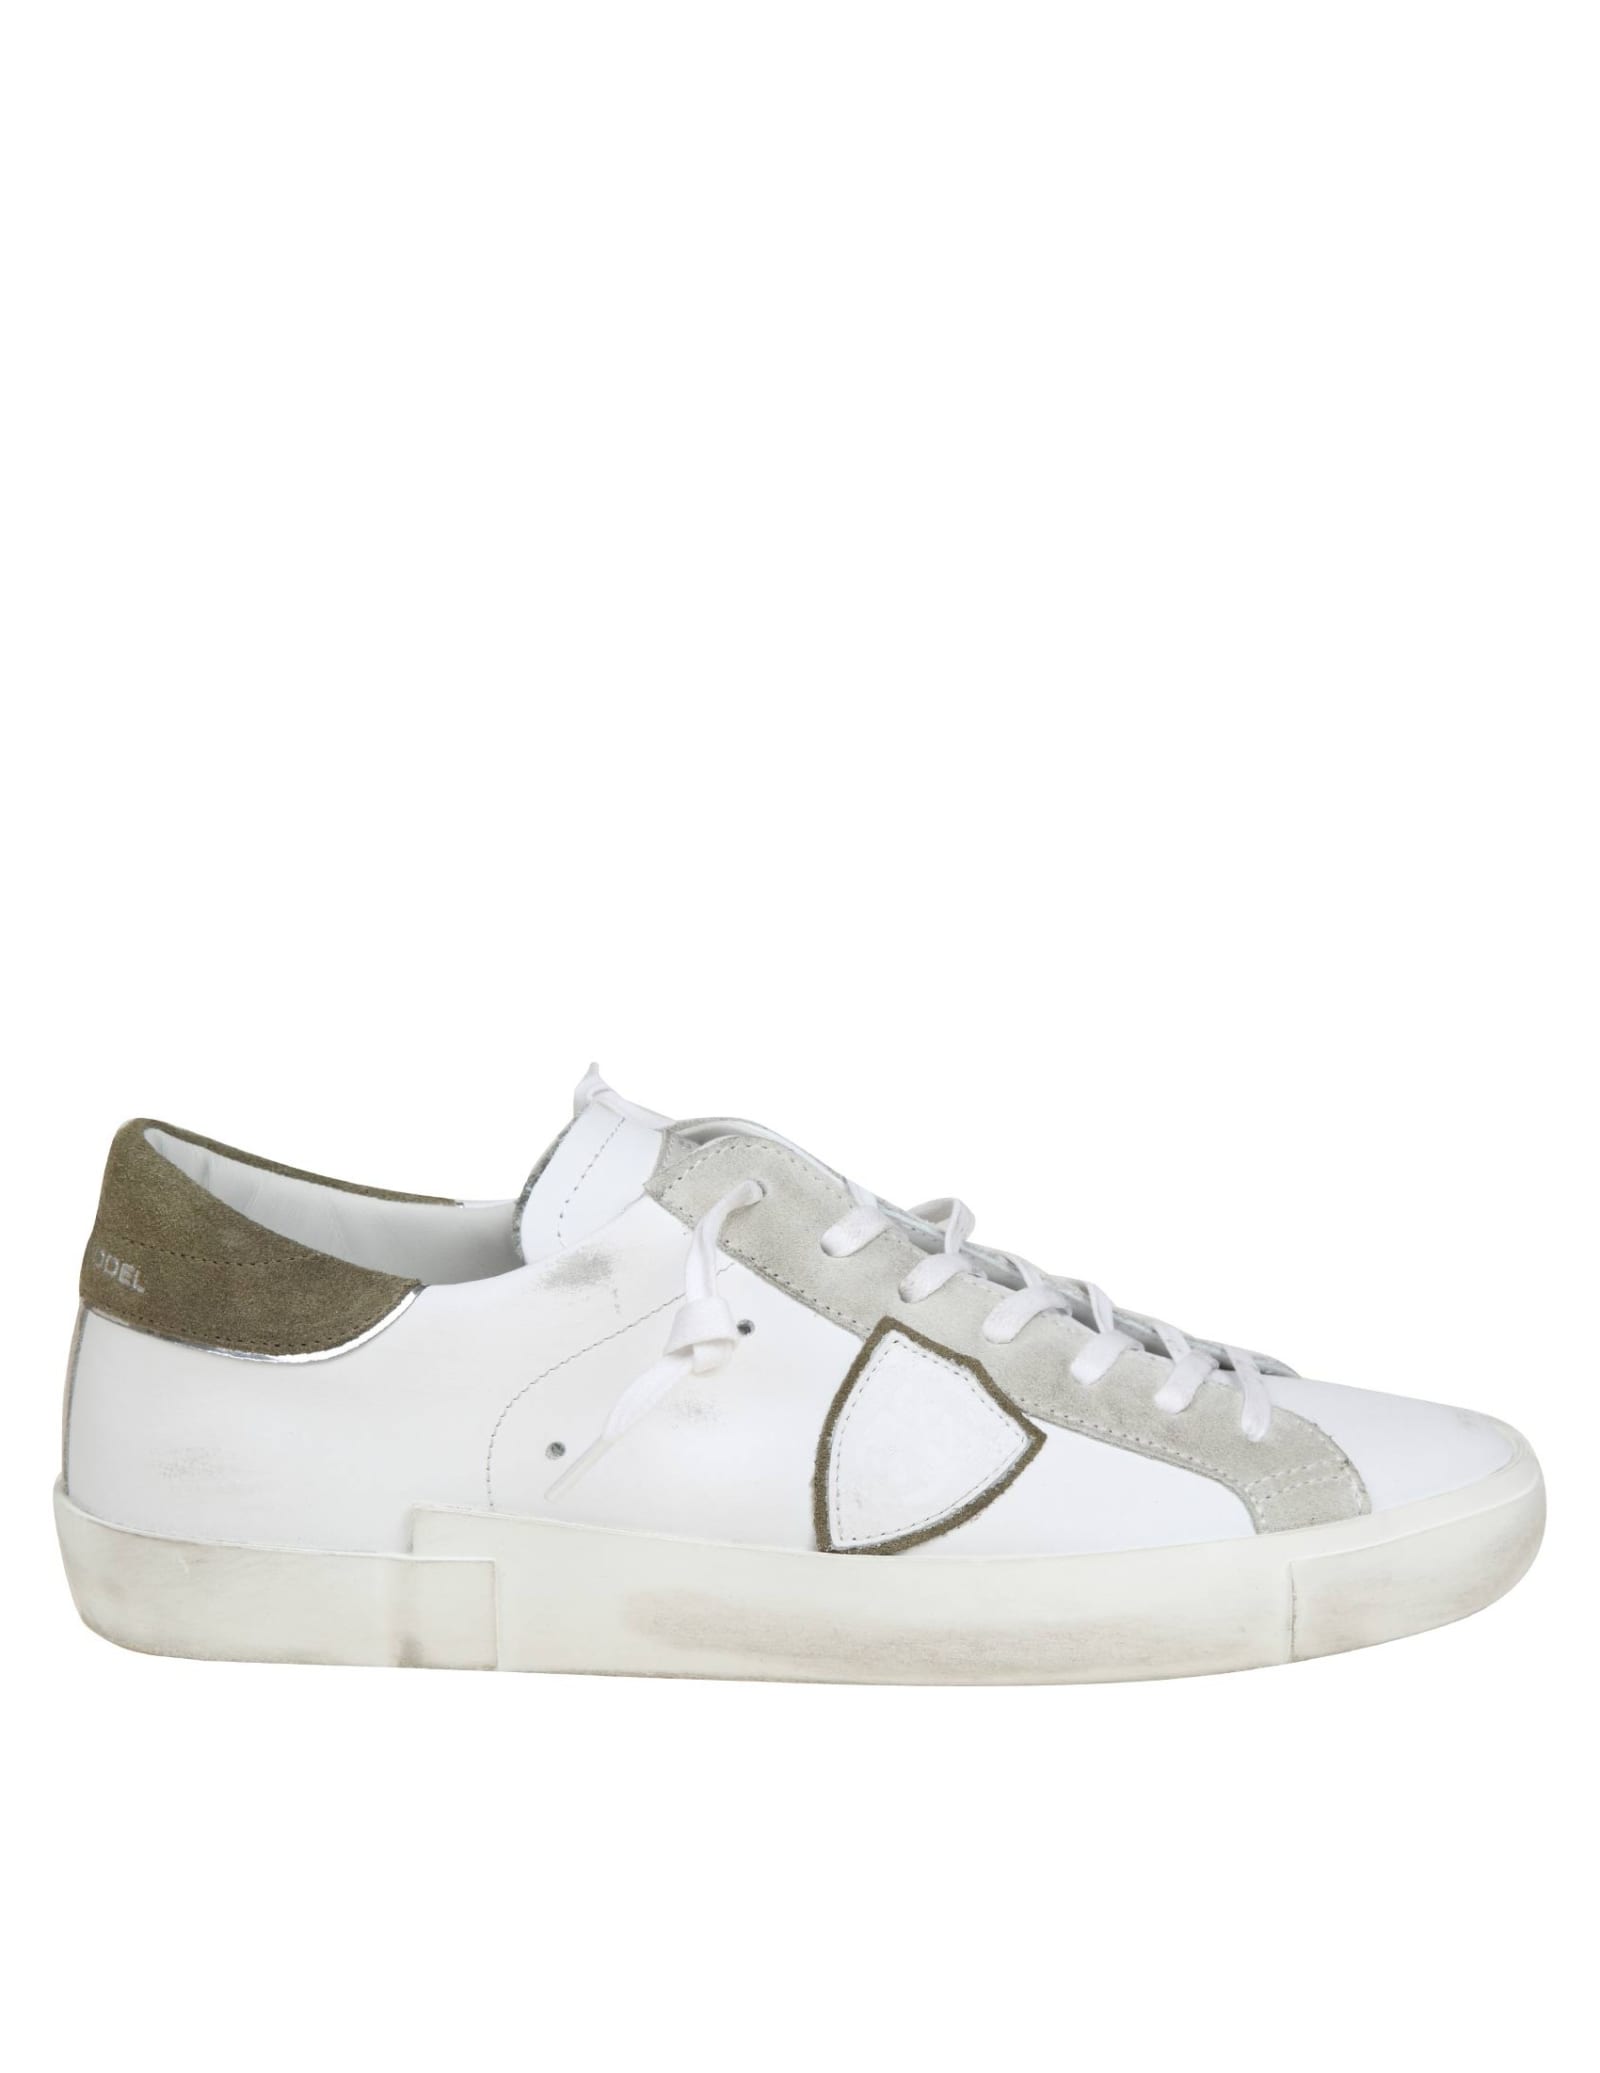 Prsx Sneakers In White And Green Leather